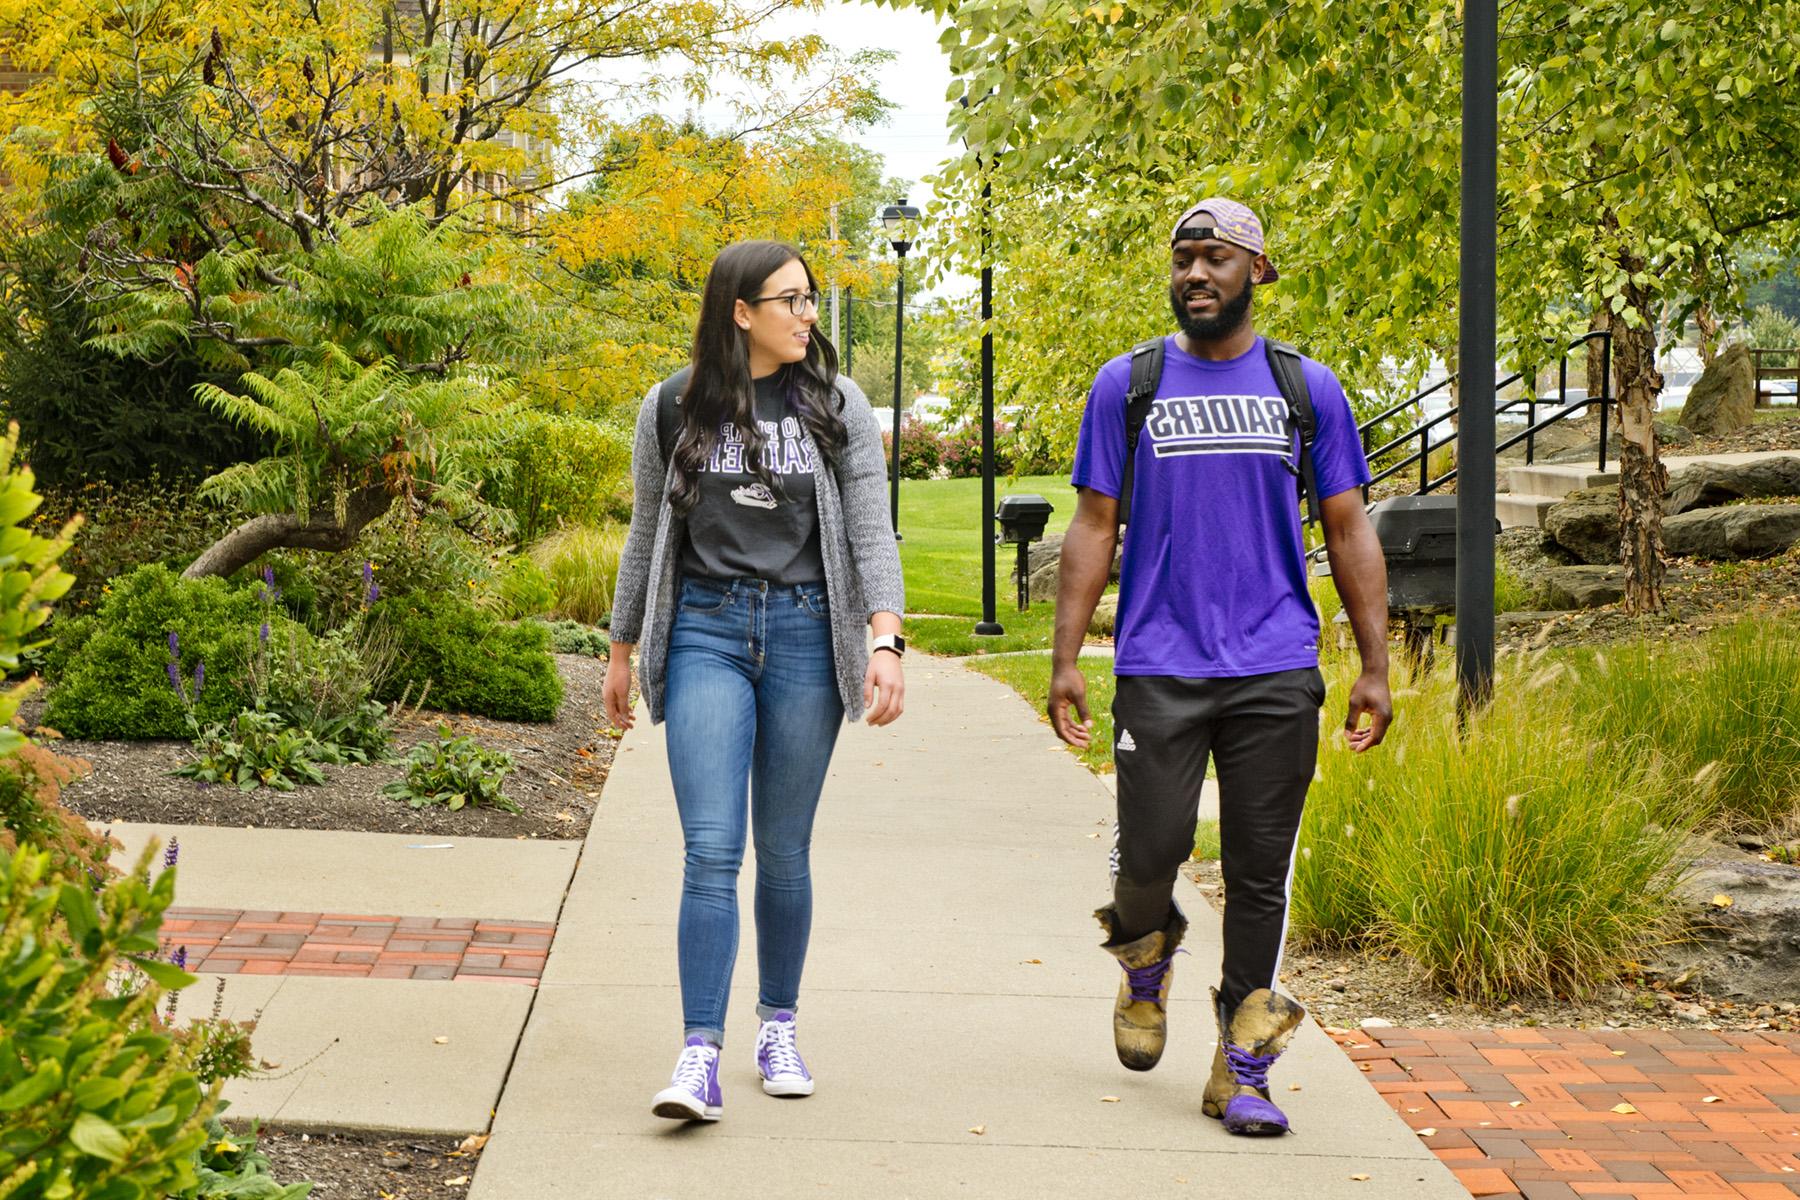 Mount Union students walking on campus